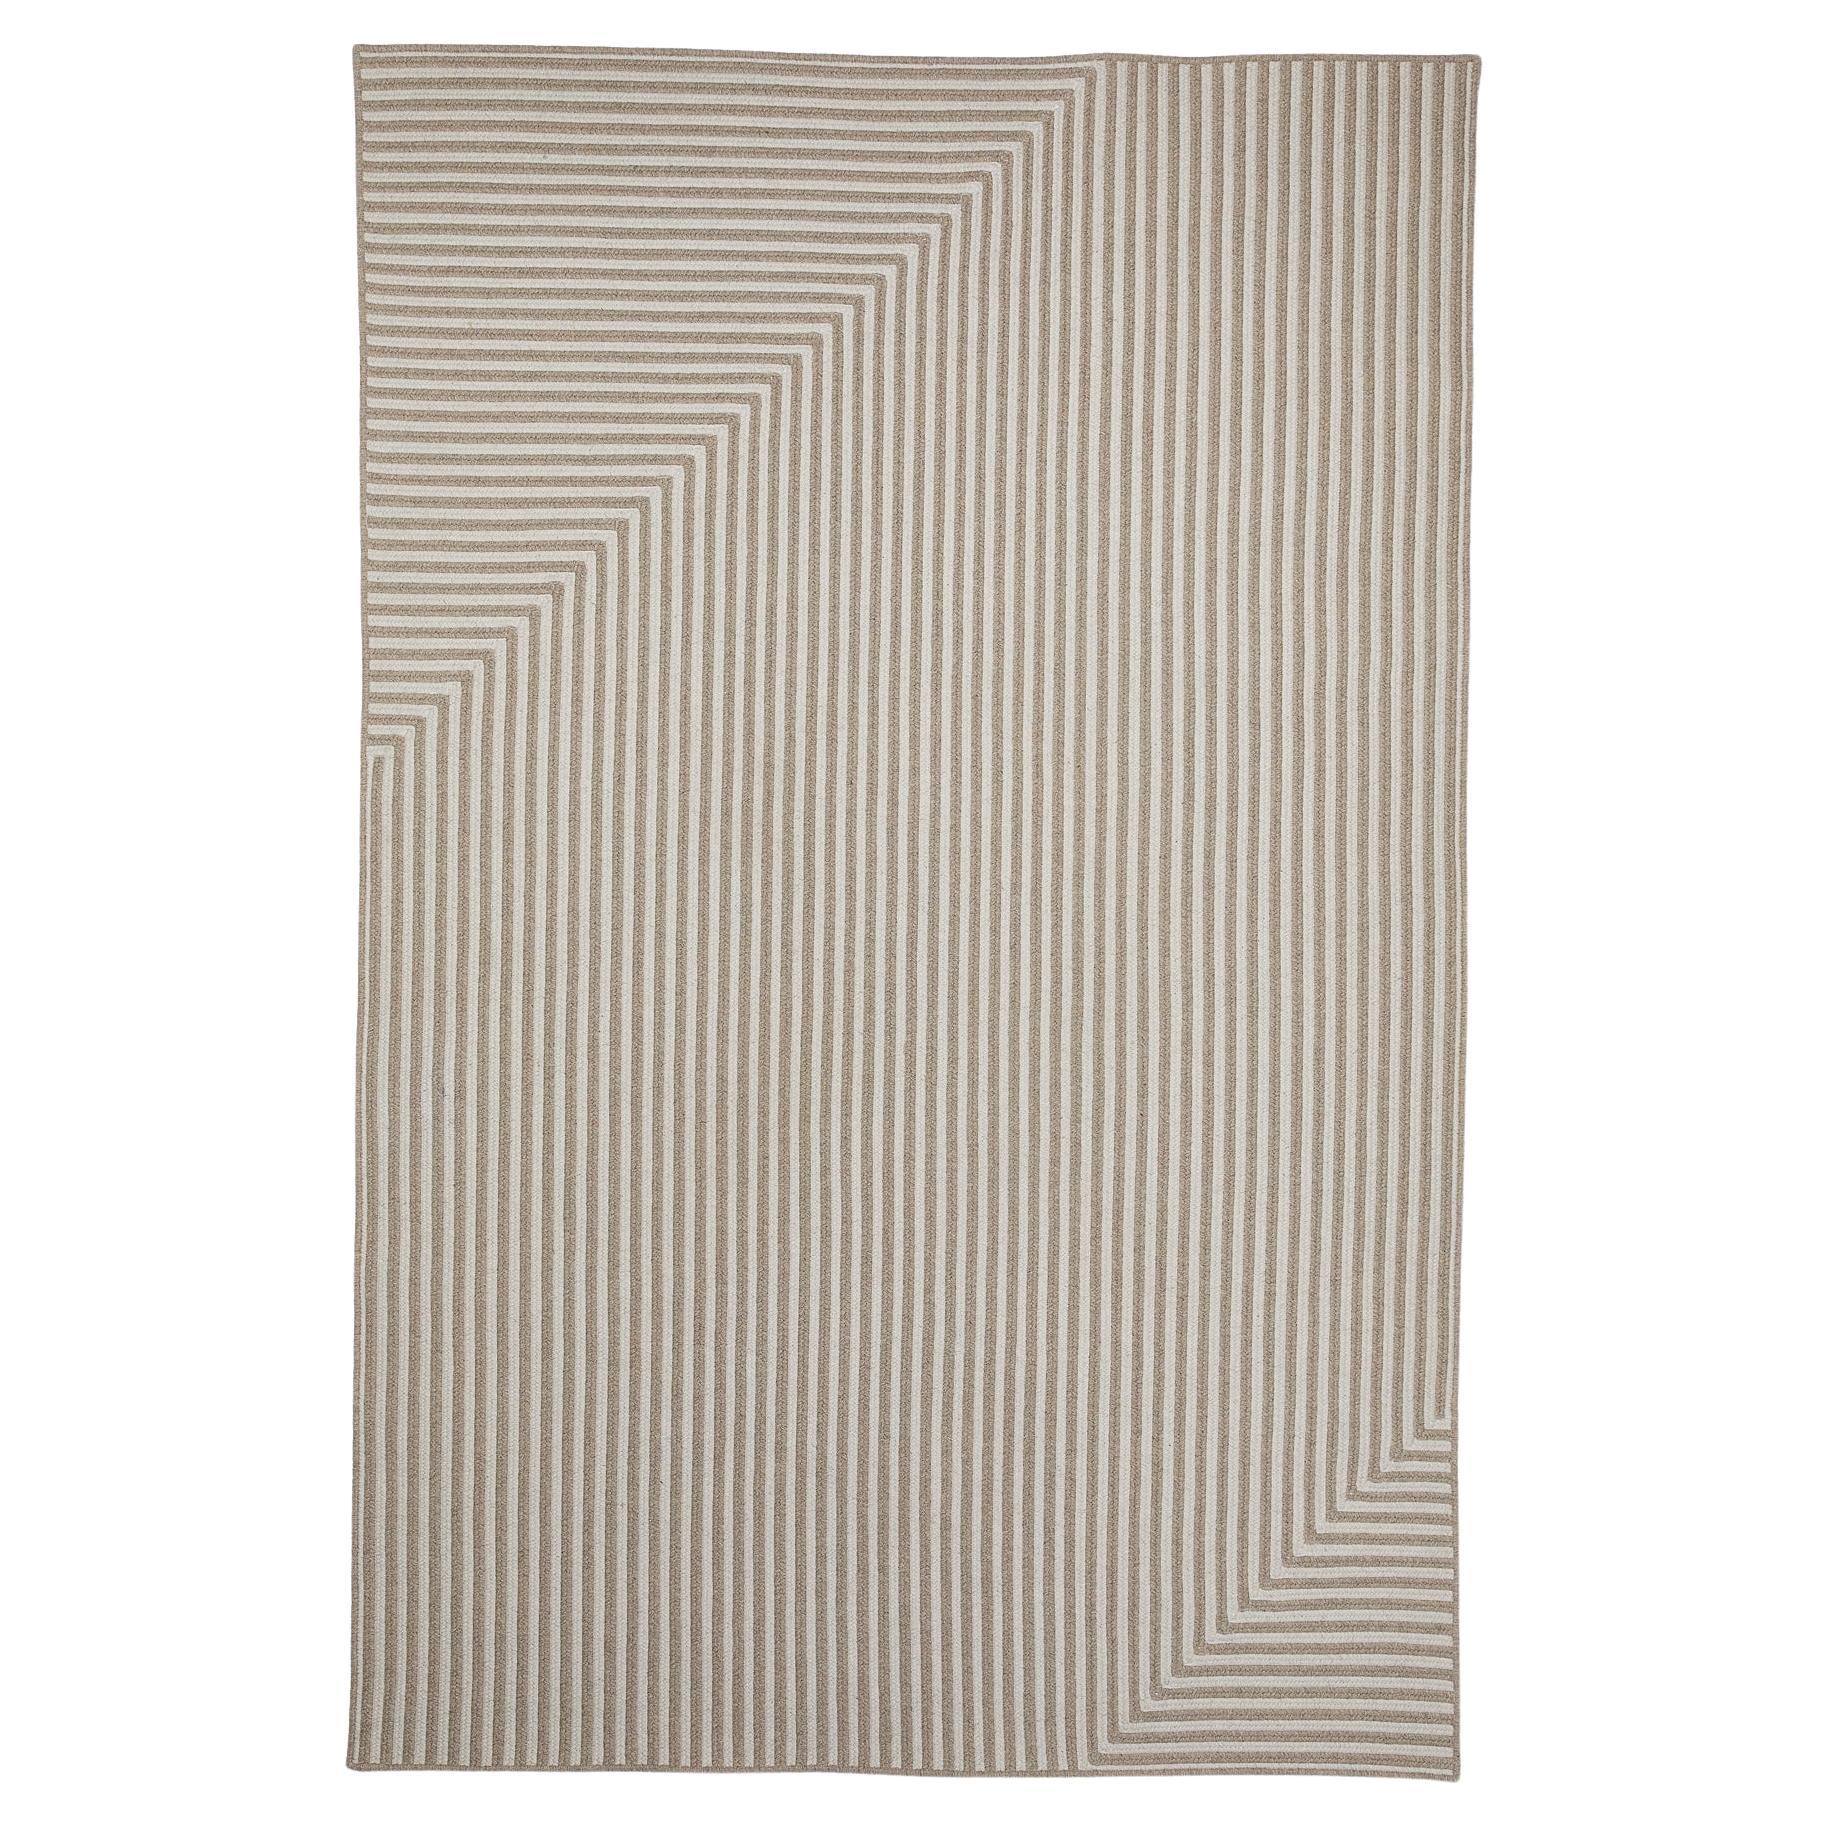 Thayer Design Studio, Natural Wool, Cream and Natural, Z Rug